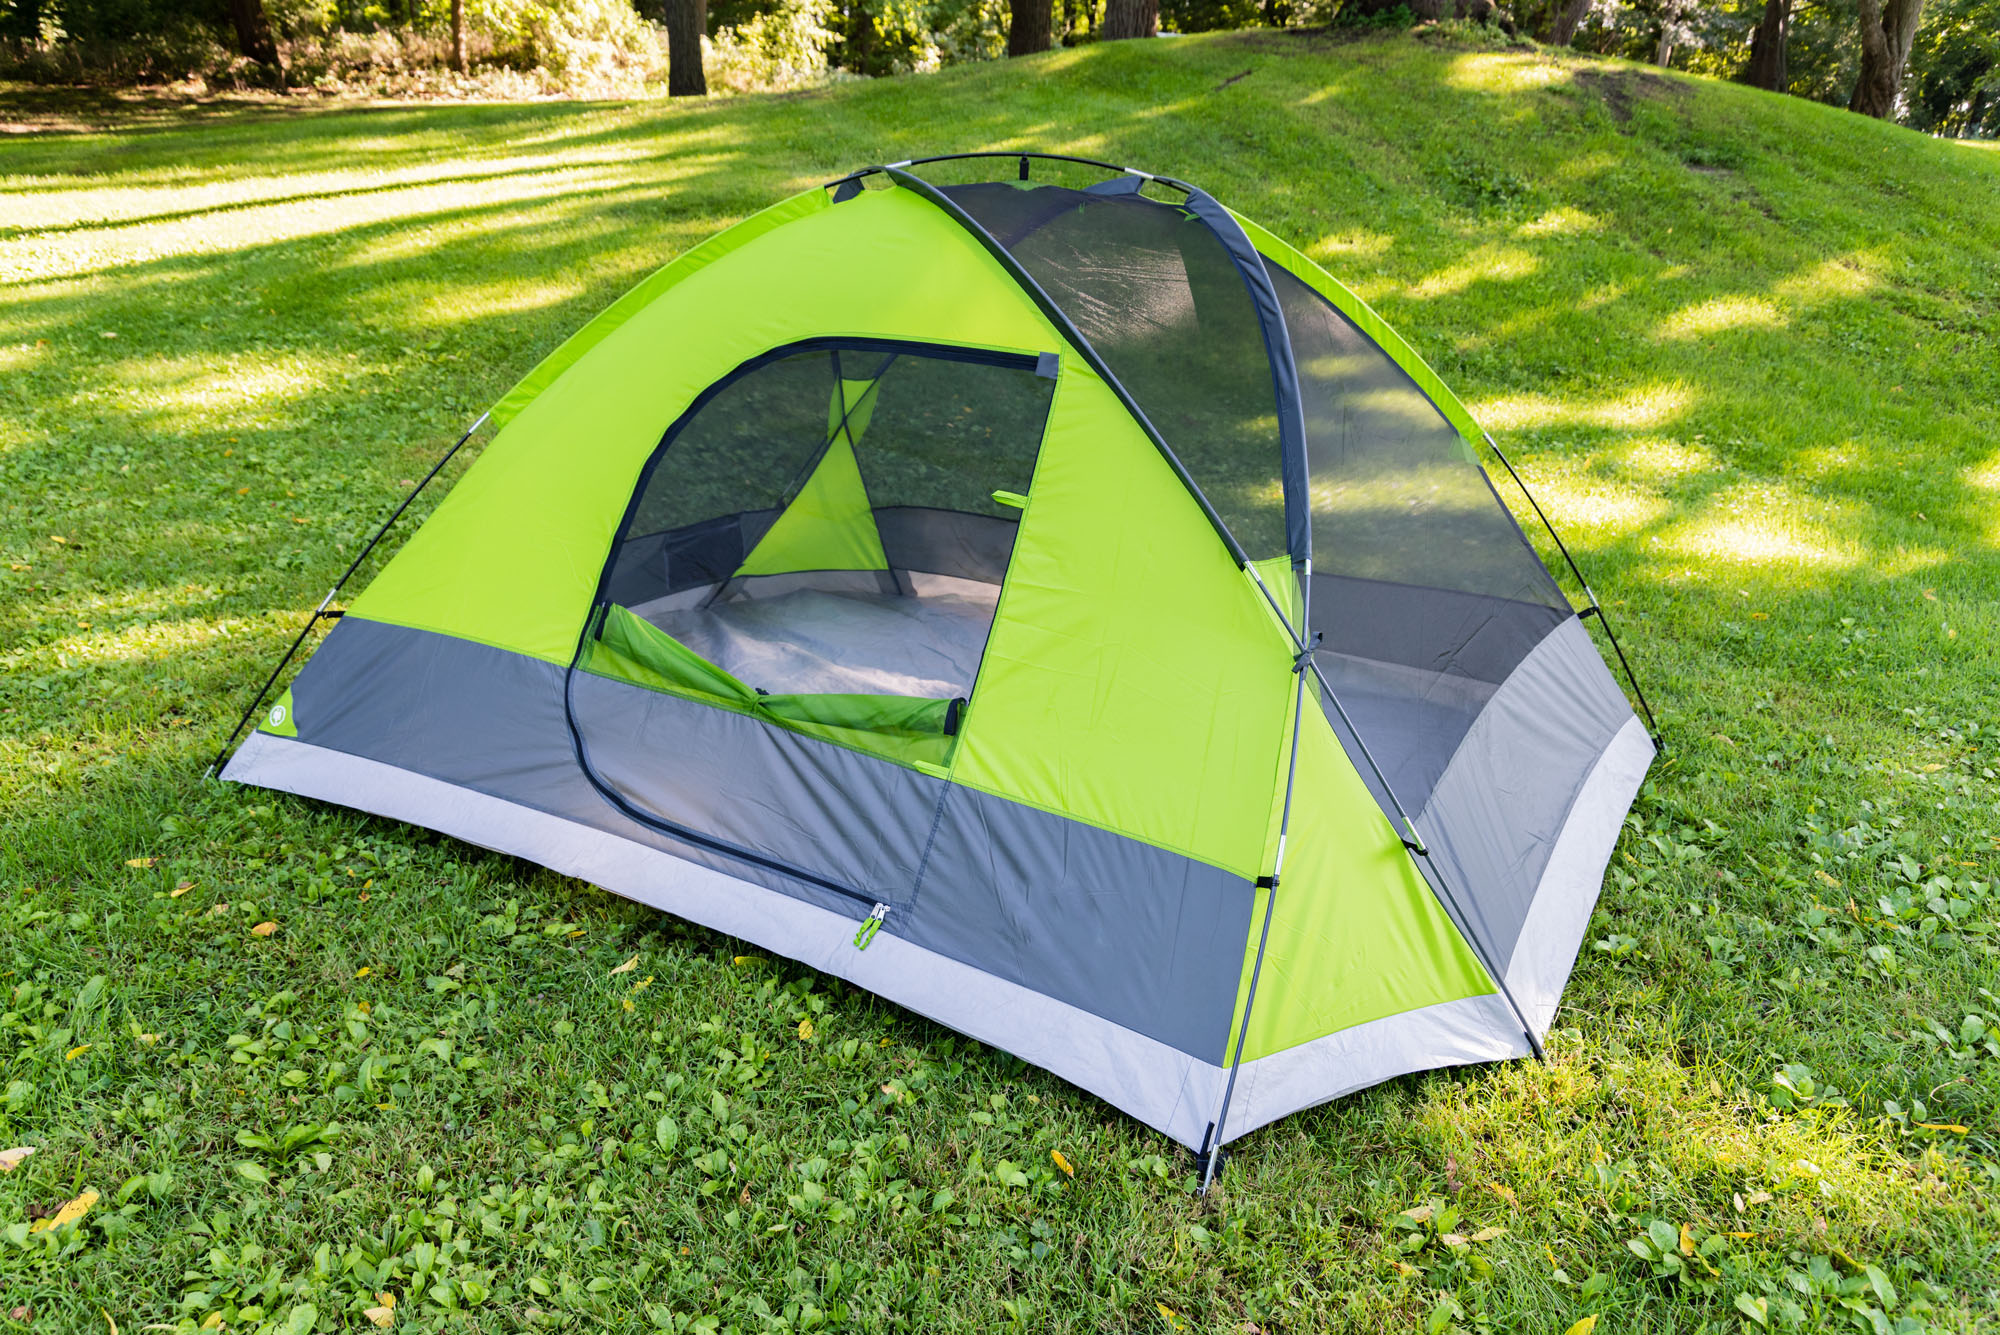 10ft x 8ft 5P DOME TENT WITH FULL FLY - JC&A Inc.